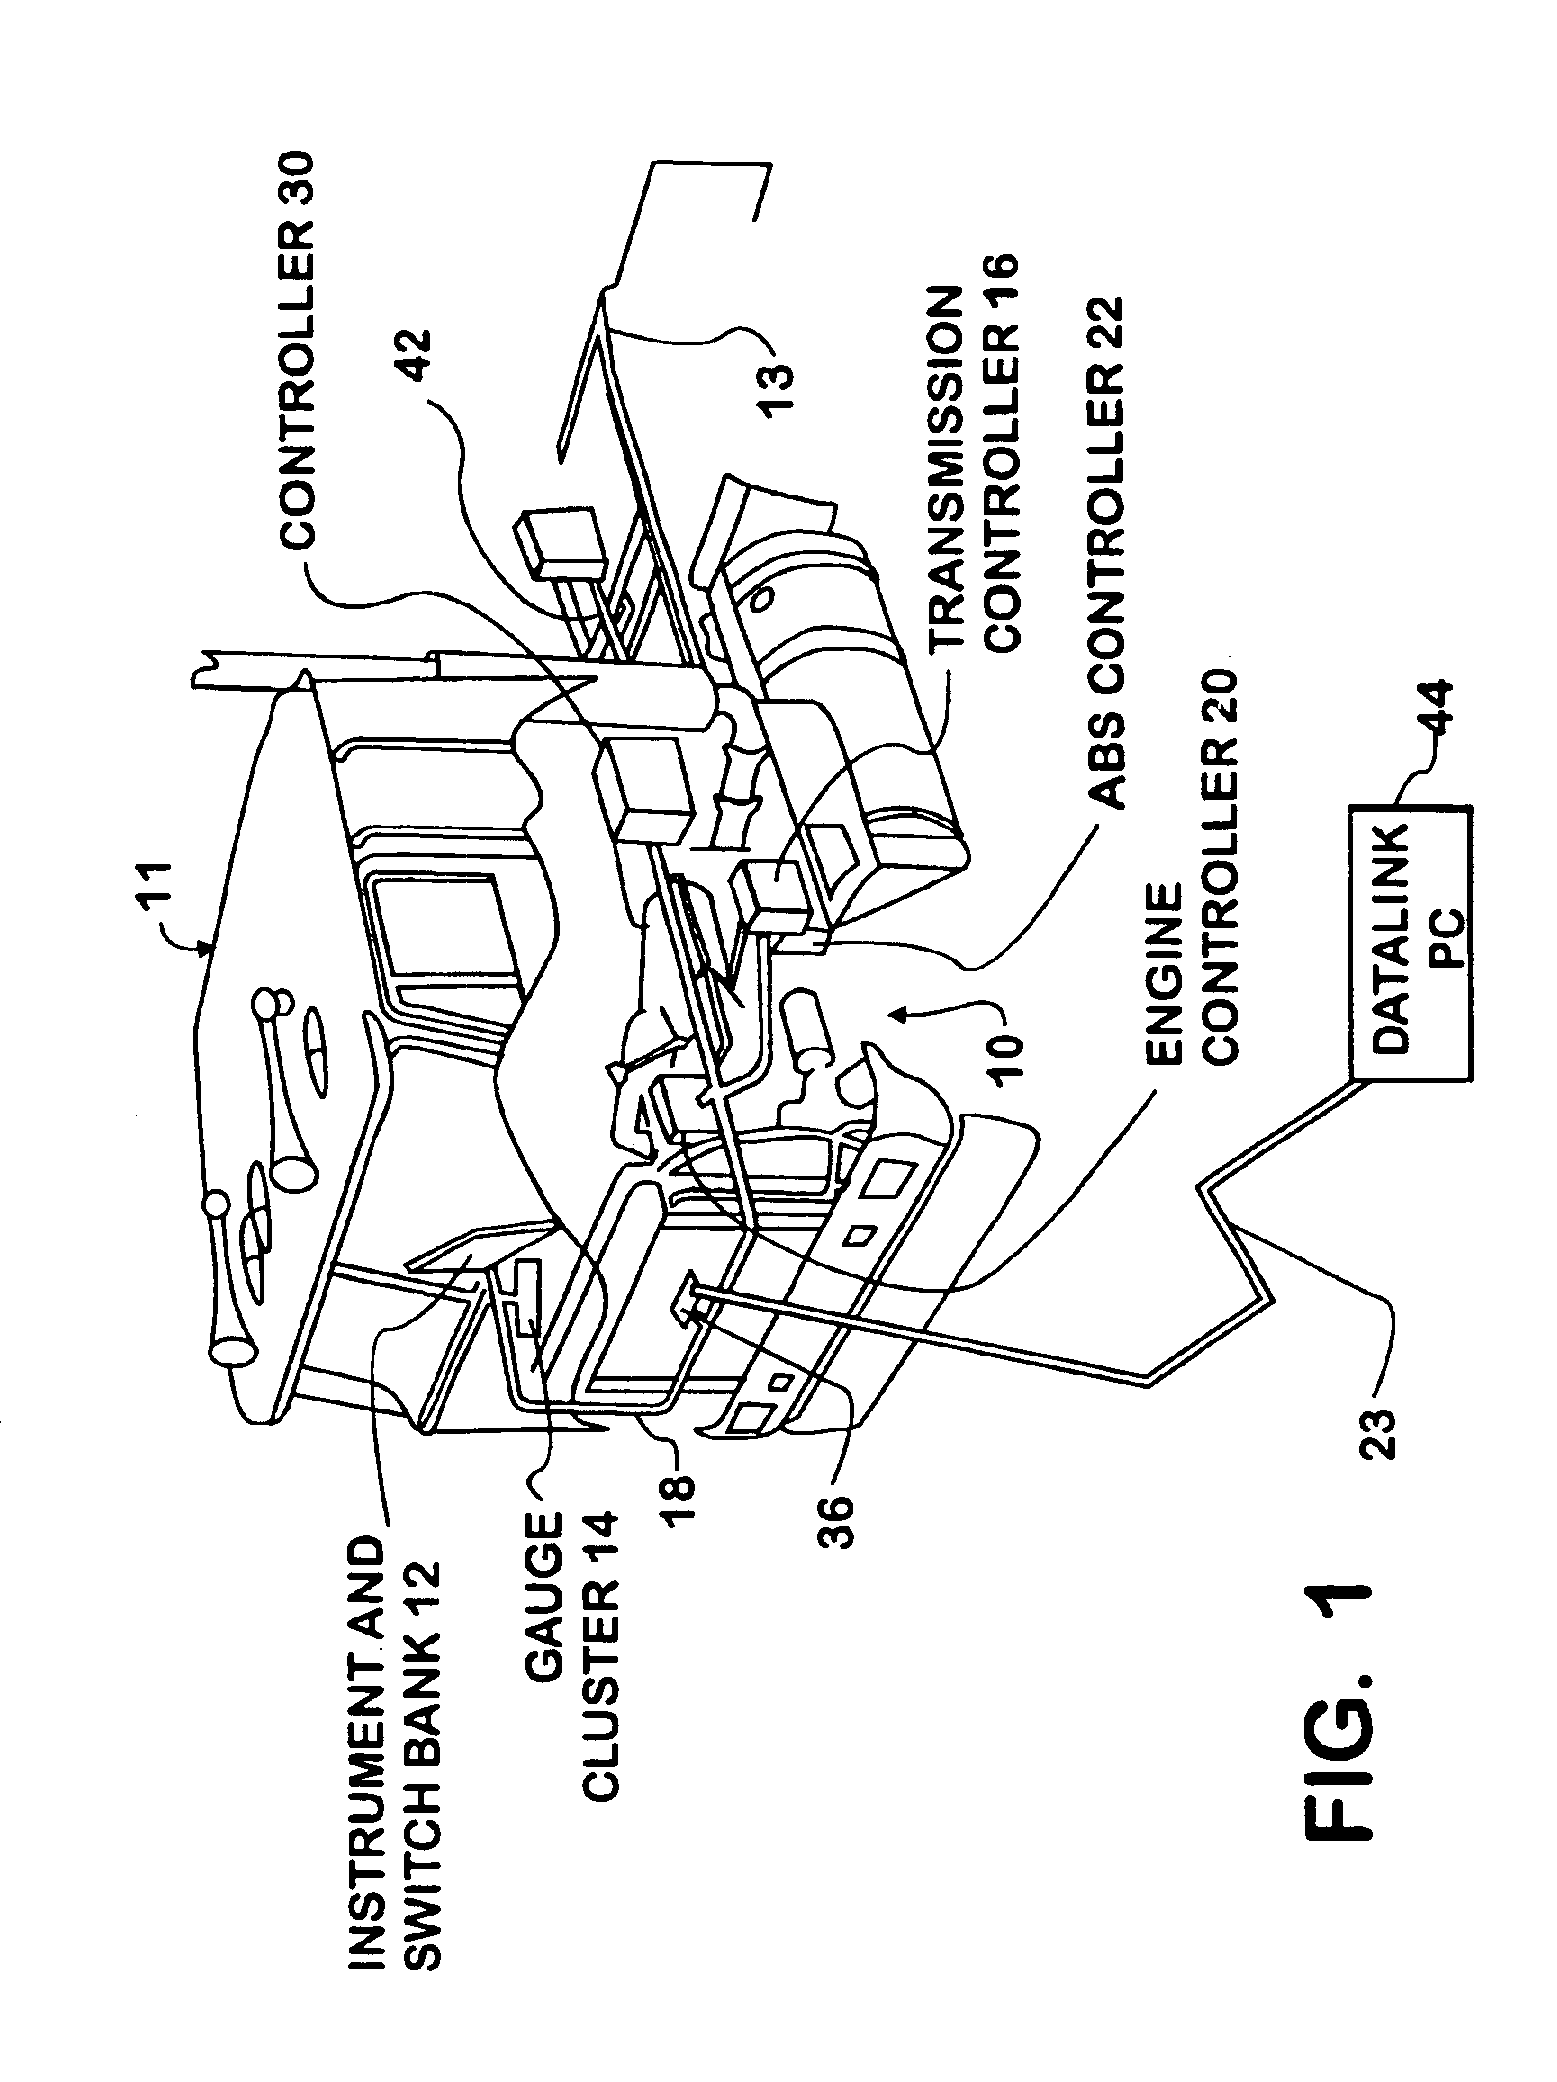 Consistent application programming interface for communicating with disparate vehicle network classes